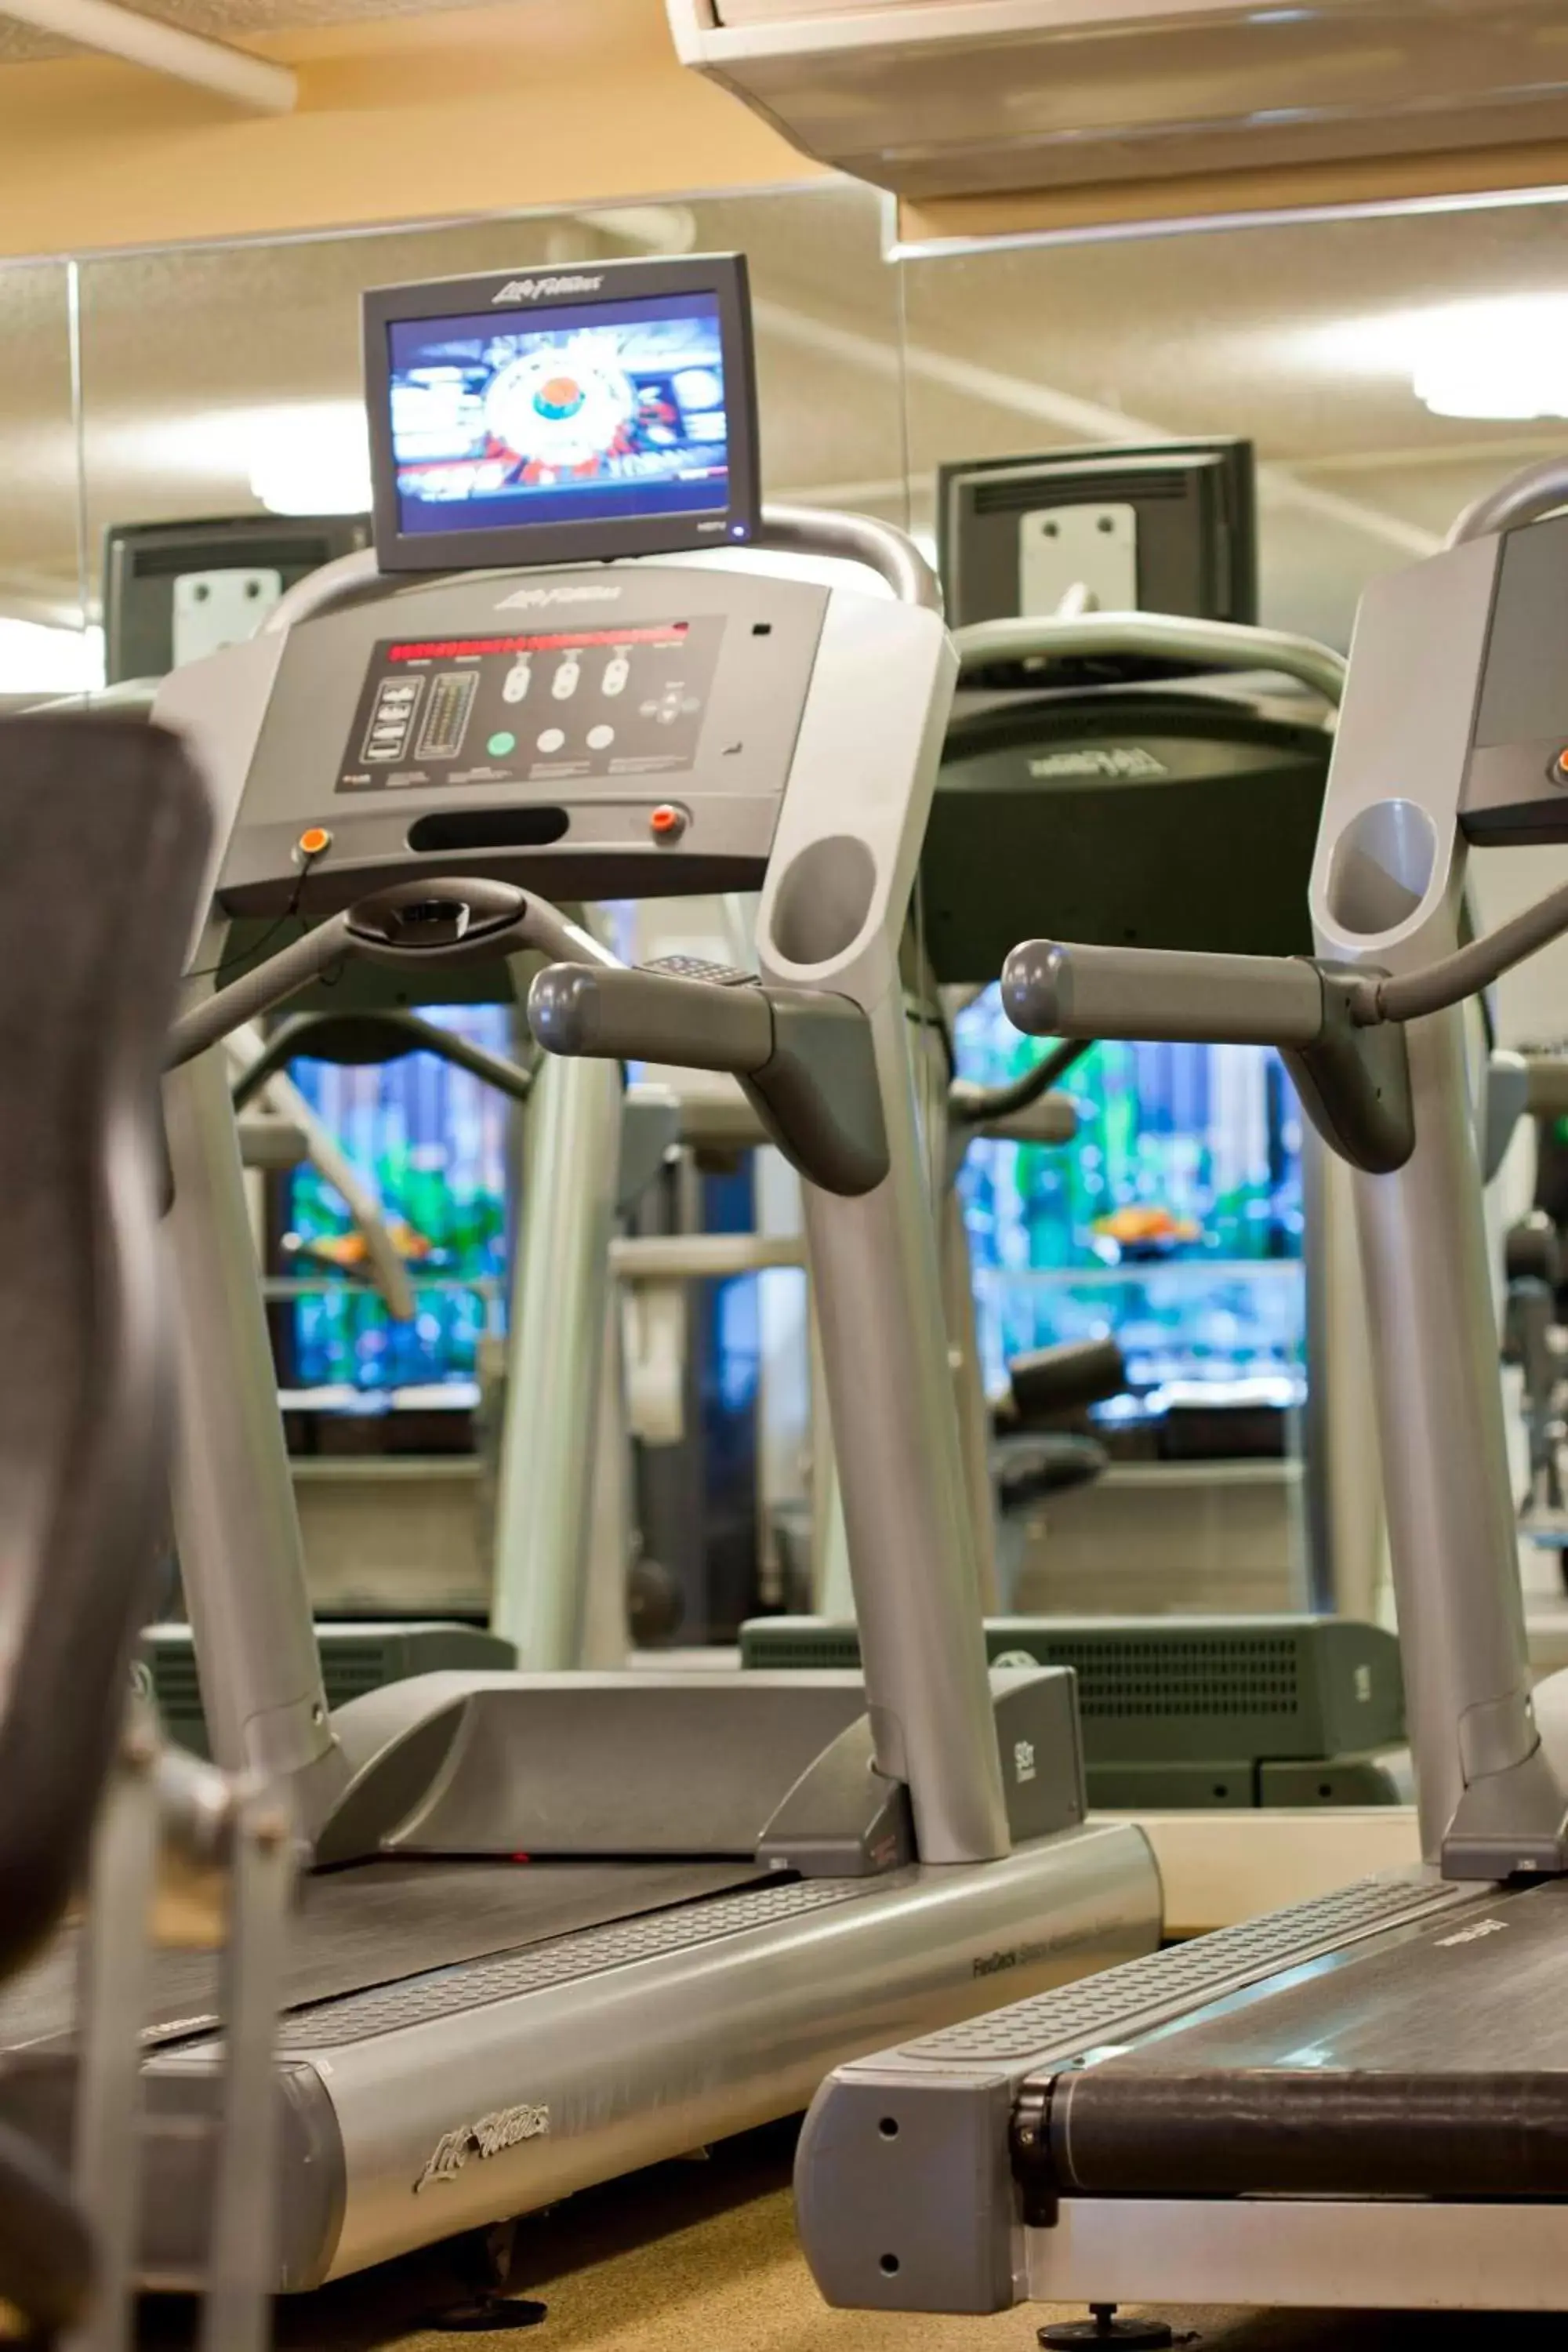 Fitness centre/facilities, Fitness Center/Facilities in Seattle Airport Marriott